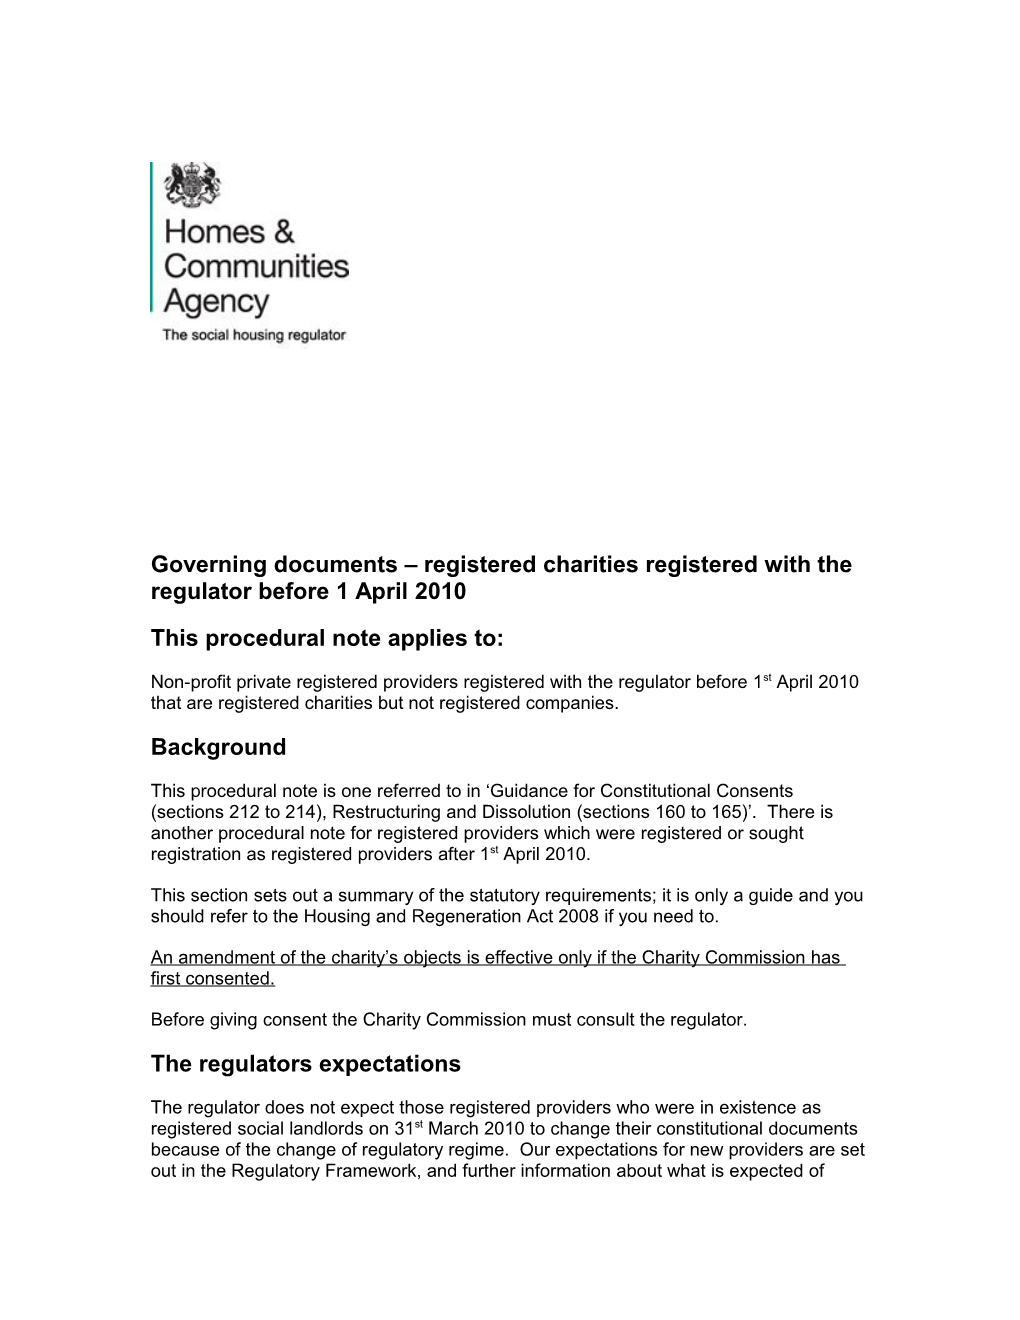 Governing Documents Registered Charities Registered with the Regulator Before 1 April 2010